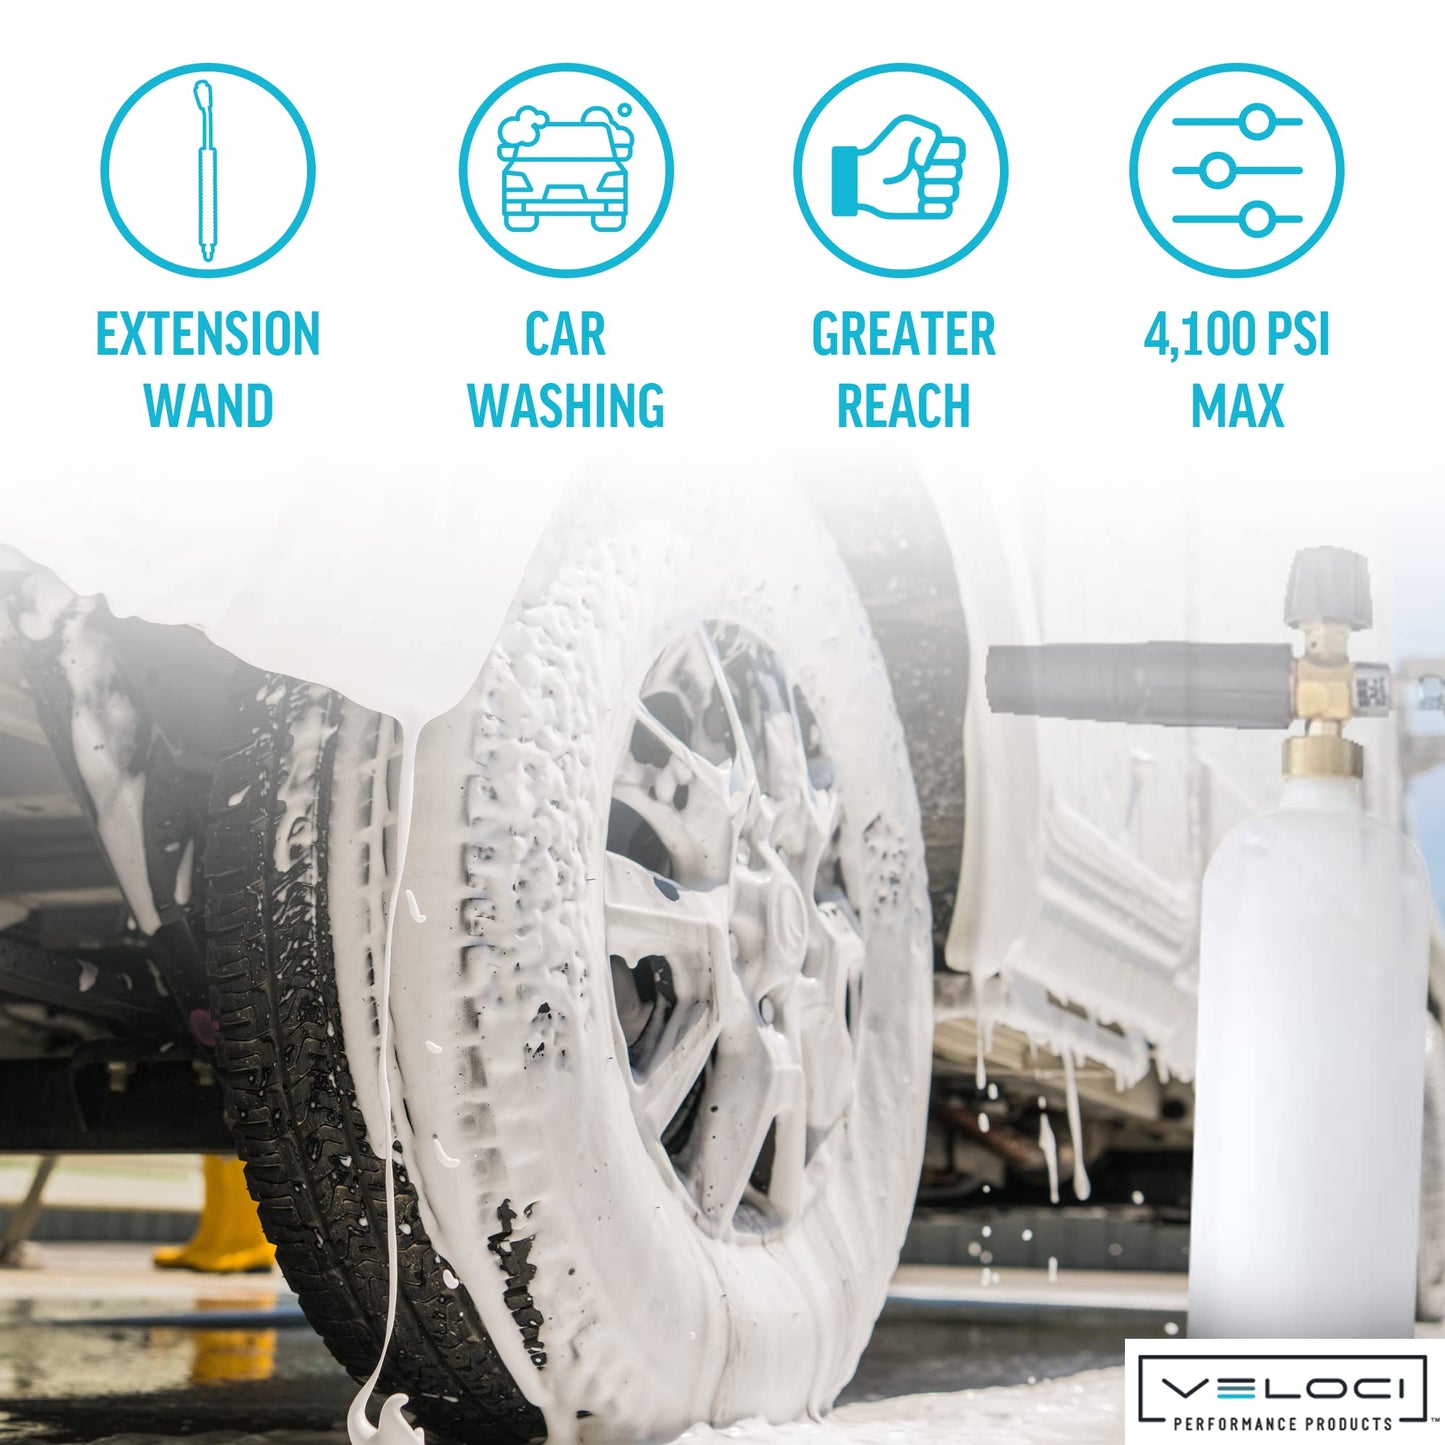 MTM Hydro Pressure Washer 20? Extension Wand Kit, High Pressure Sprayer 4100 PSI for Car Wash and Detailing, Pressure Washer Accessories for Foam Cannon